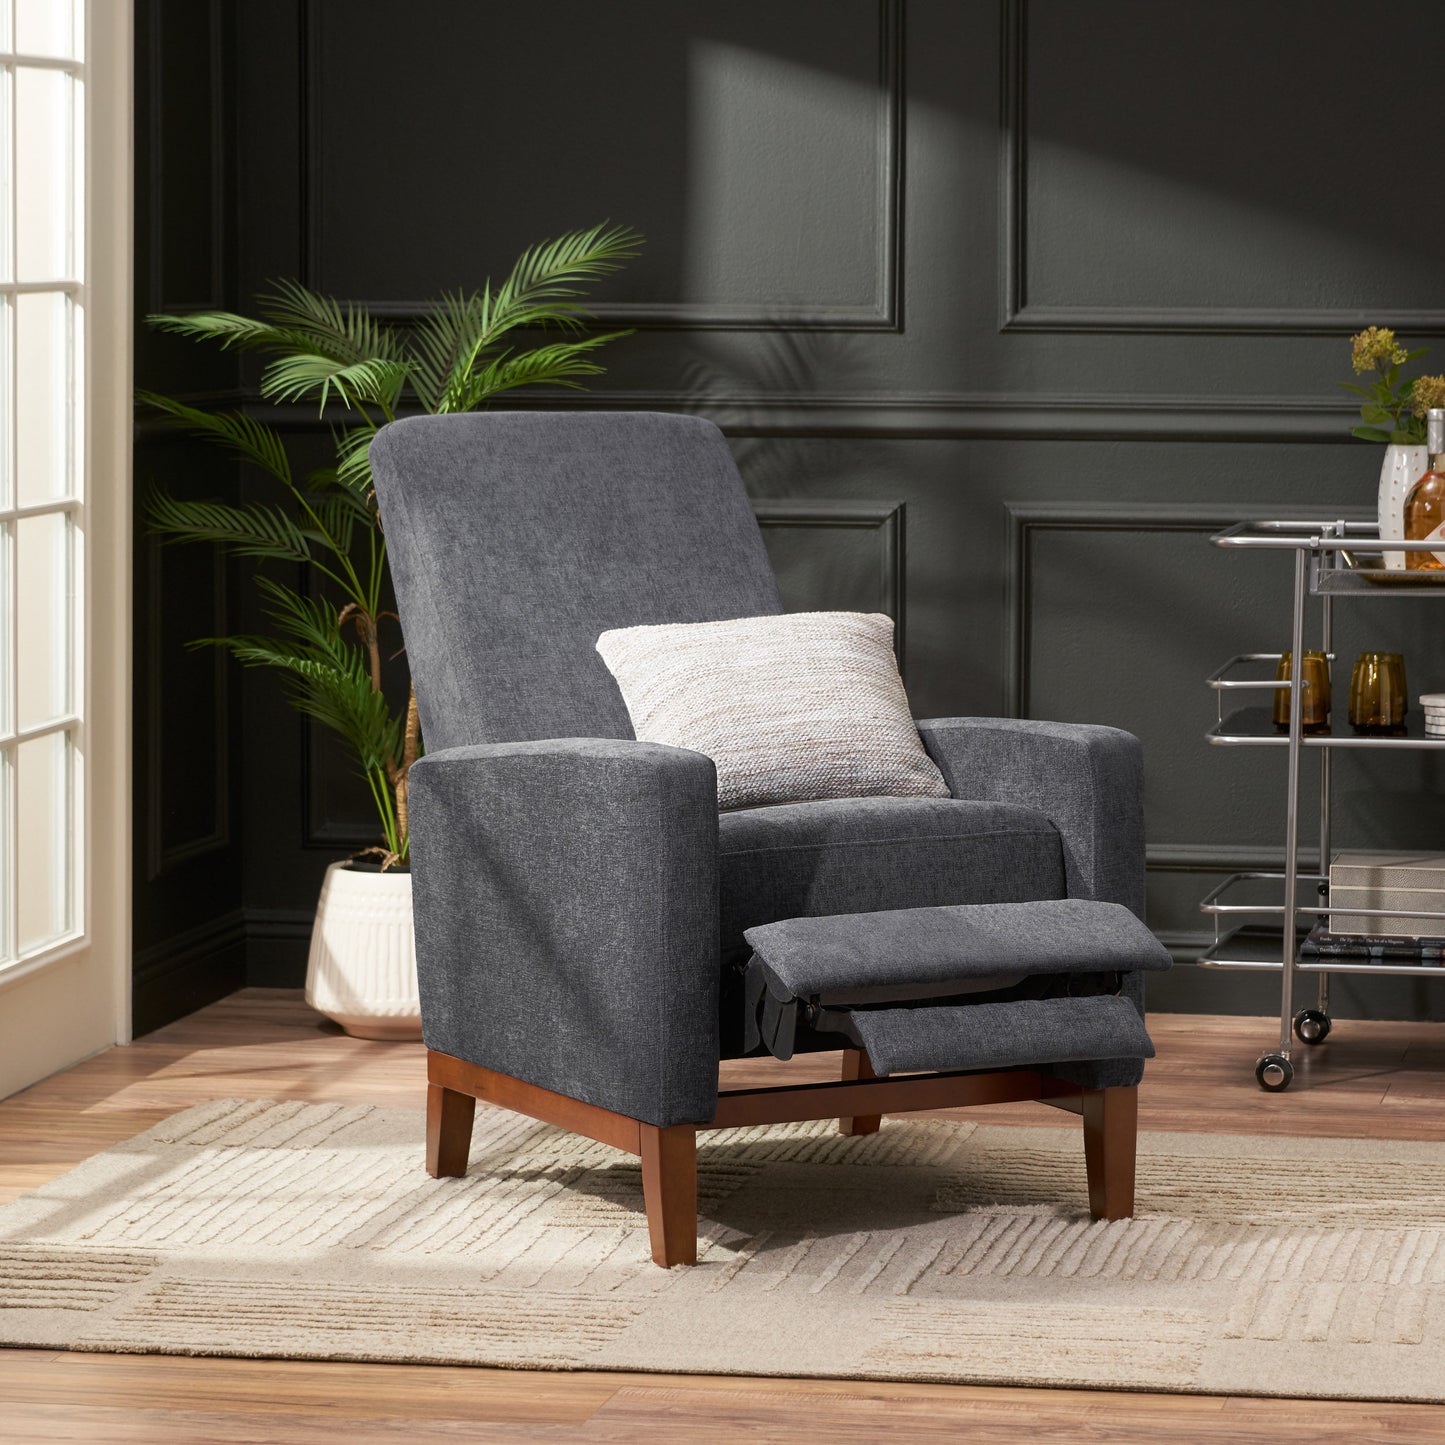 Plevna Contemporary Fabric Upholstered Pushback Recliner